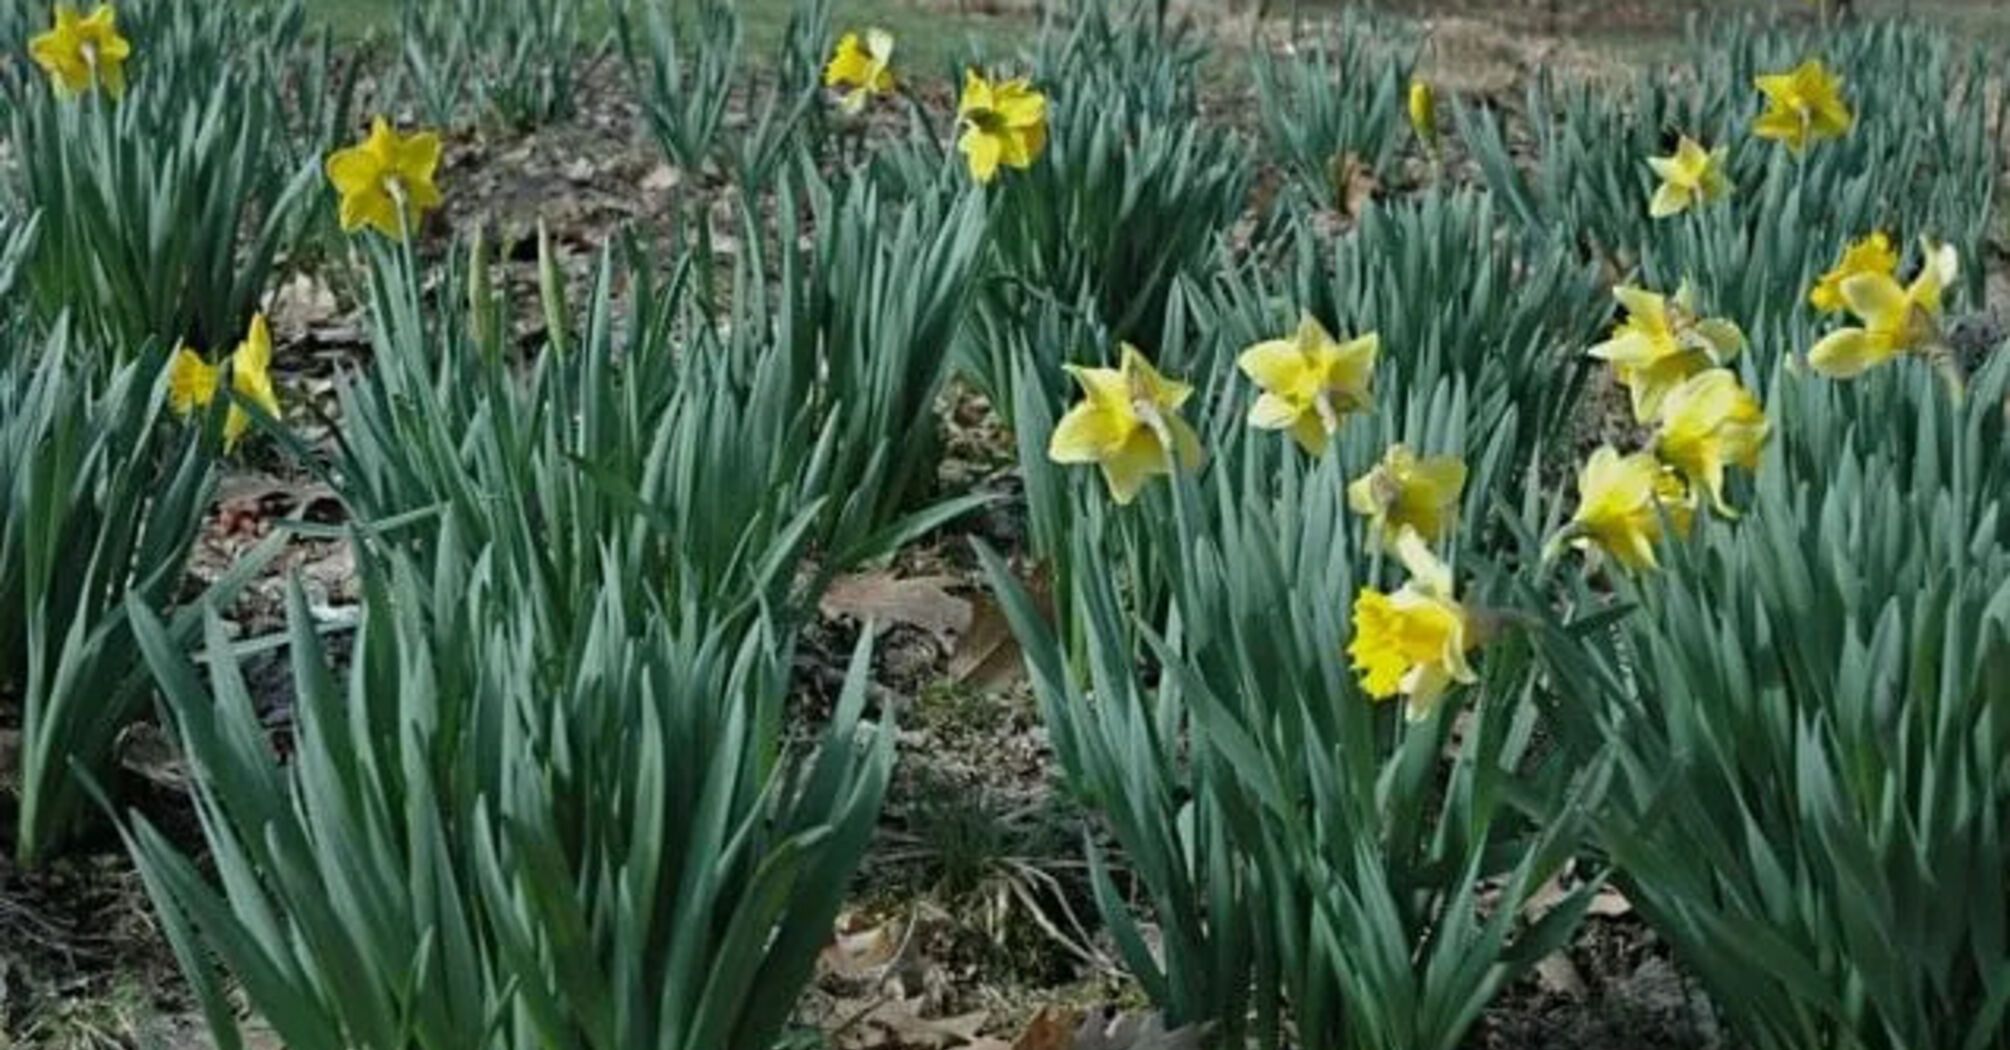 Why daffodils do not bloom